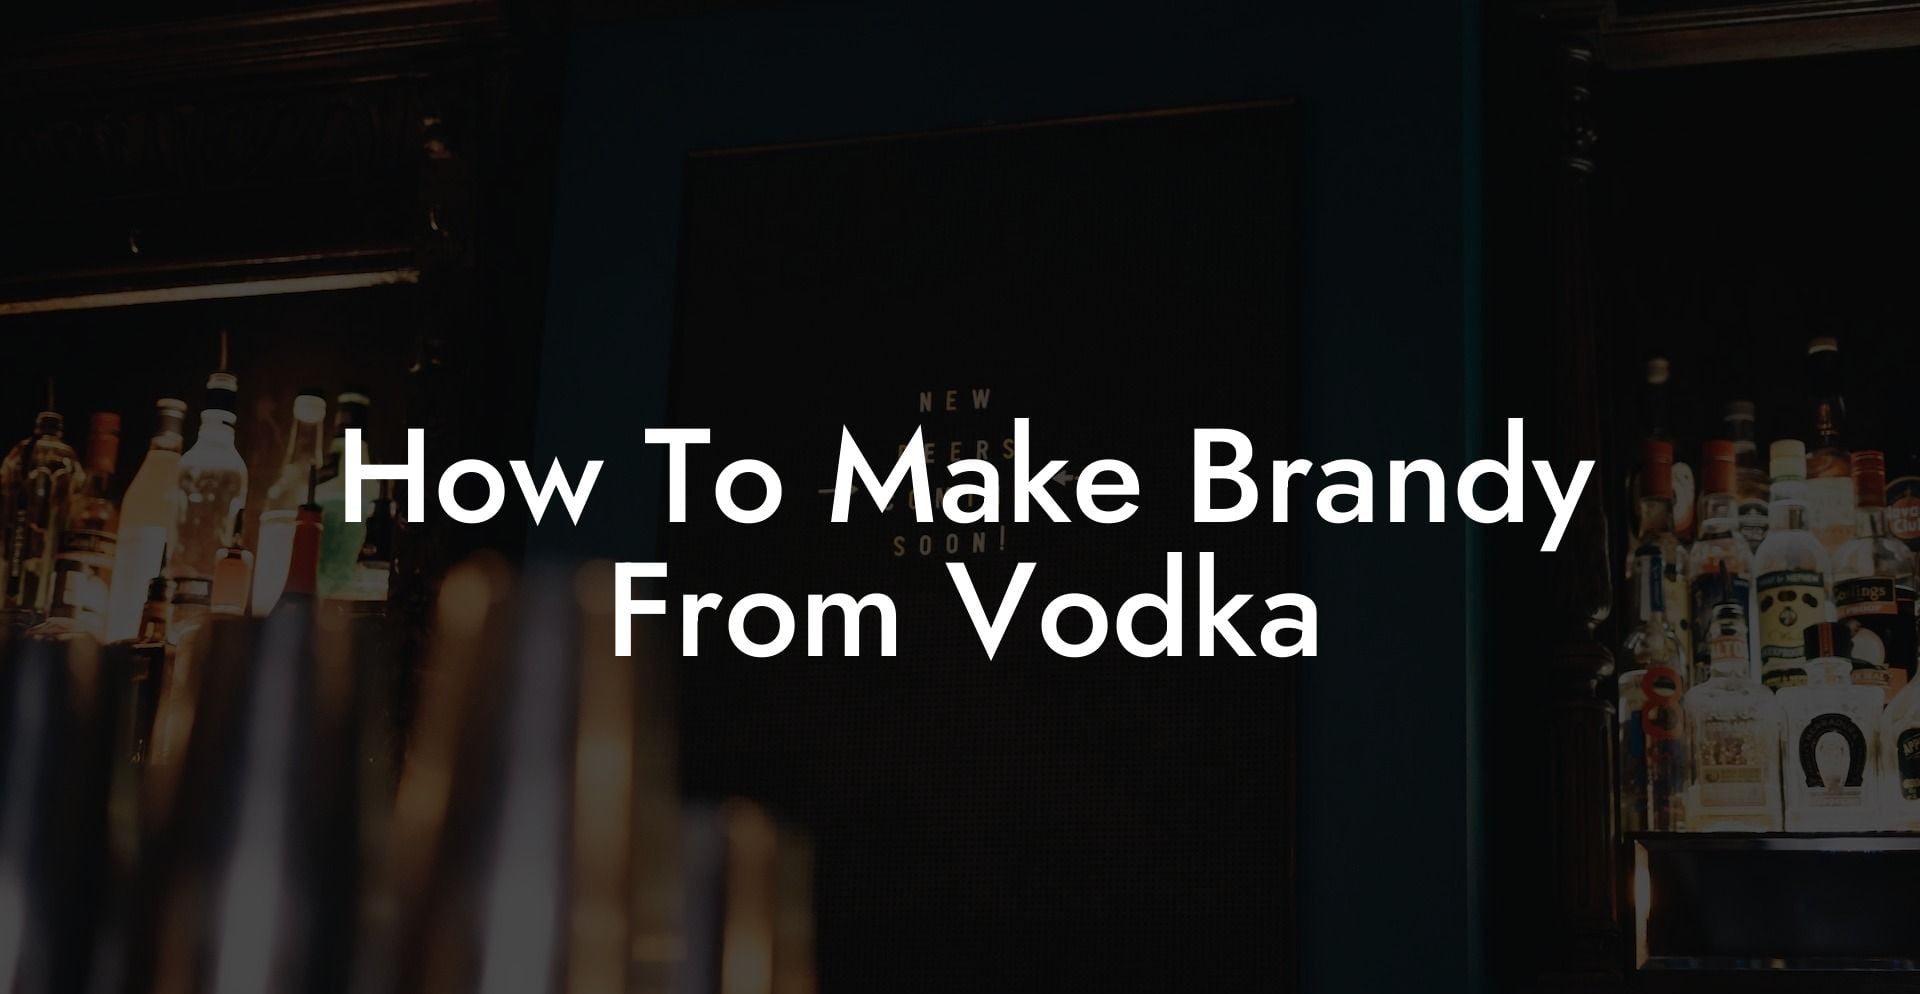 How To Make Brandy From Vodka